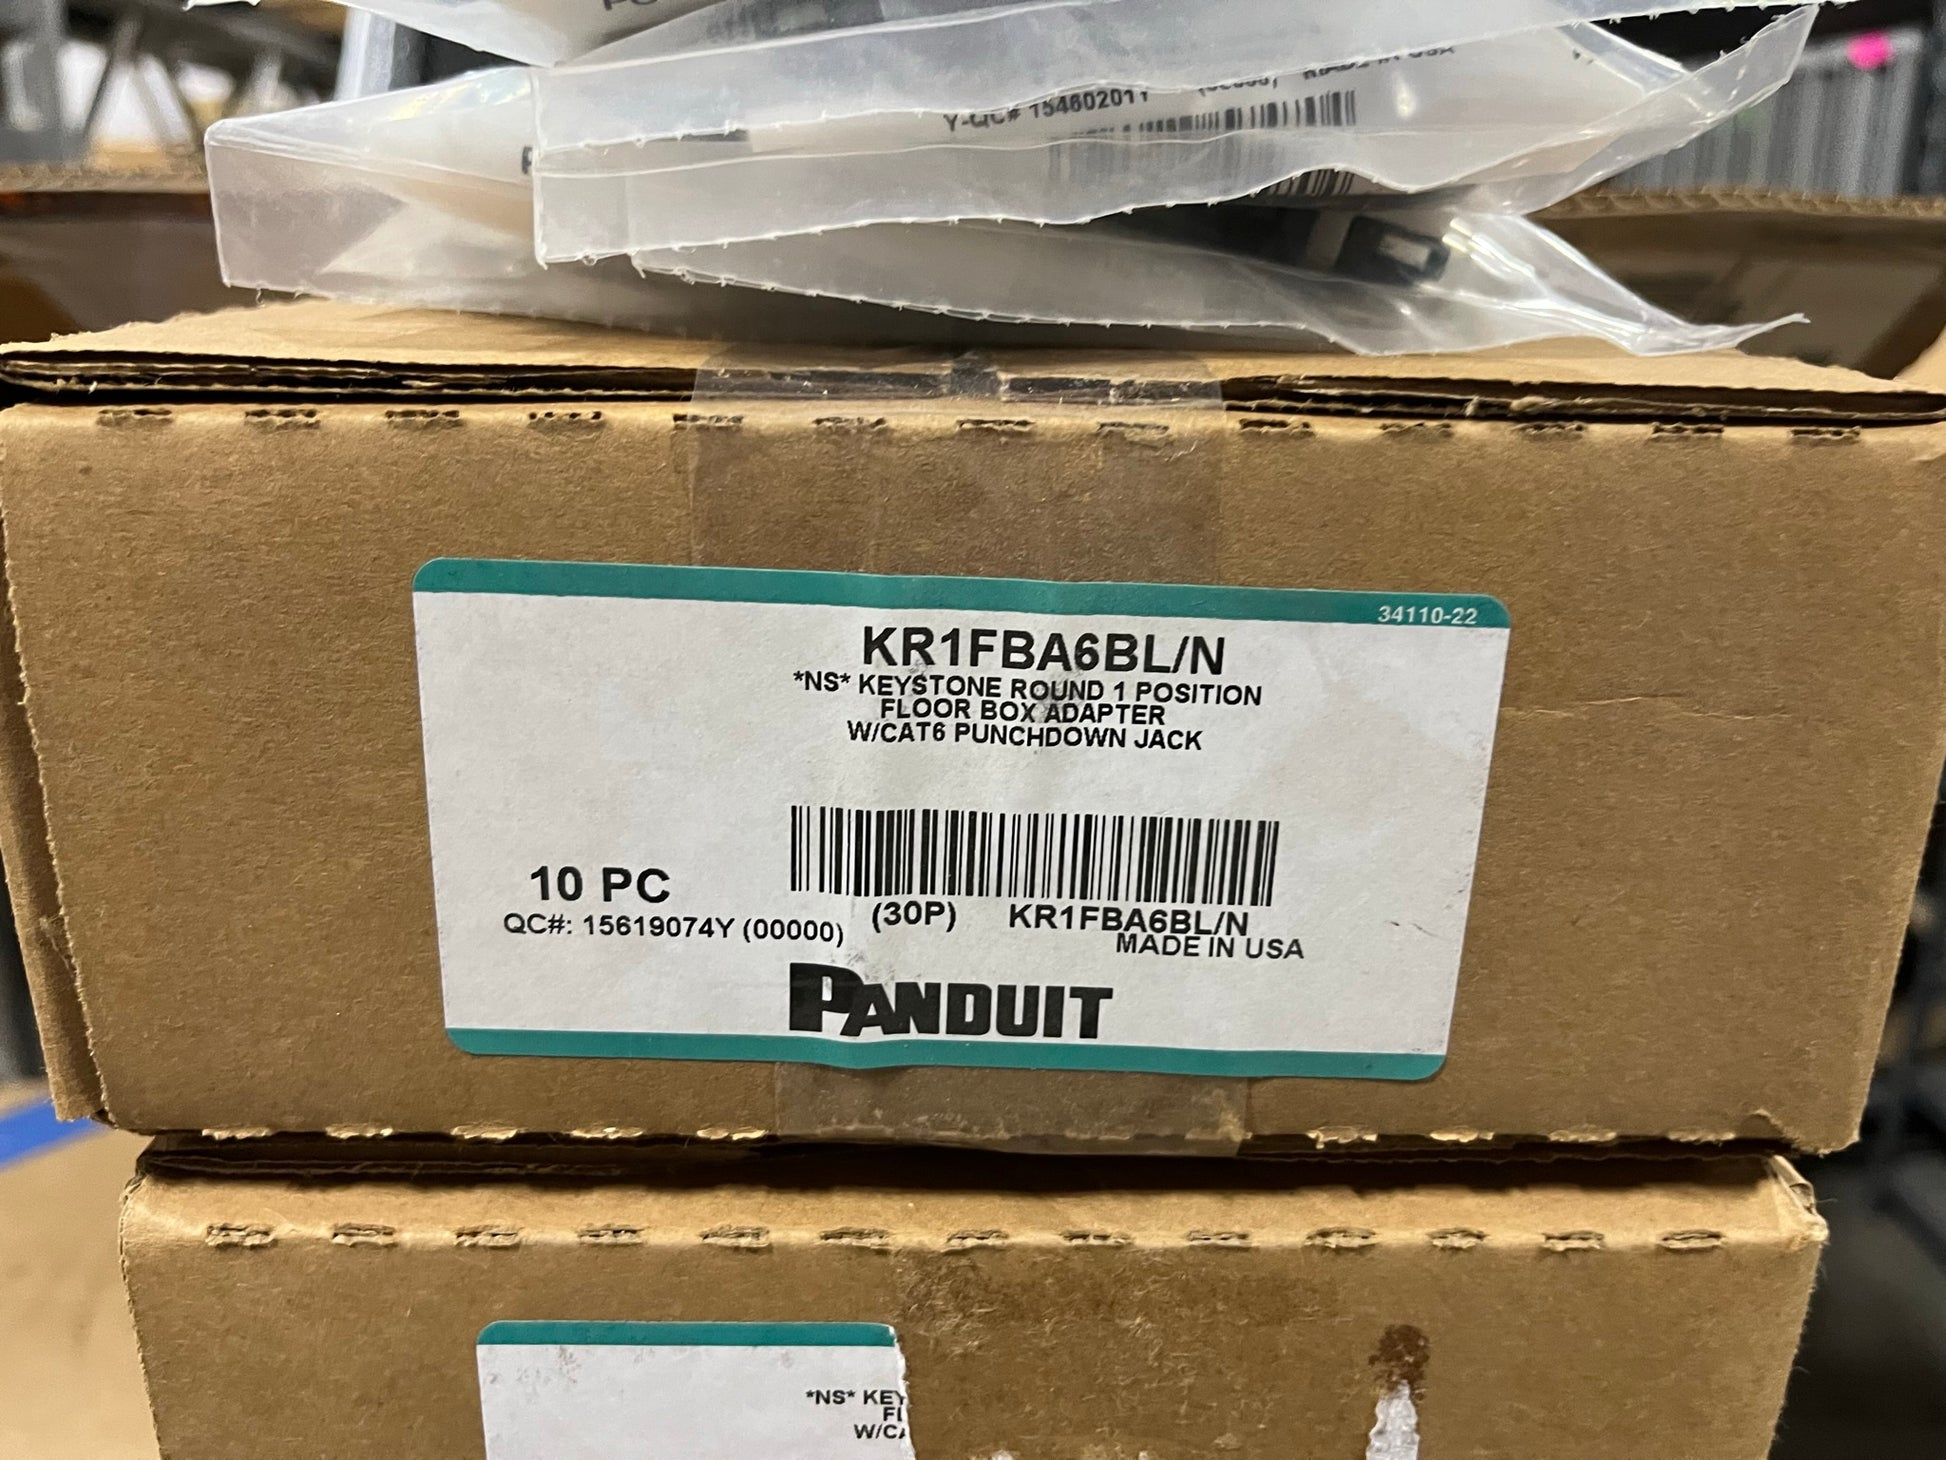 New Panduit KR1FBA6BLN, Lot of 5 Boxes of 10, New for Sale. We Sell Professional Audio Equipment. Audio Systems, Amplifiers, Consoles, Mixers, Electronics, Entertainment, Sound, Live.